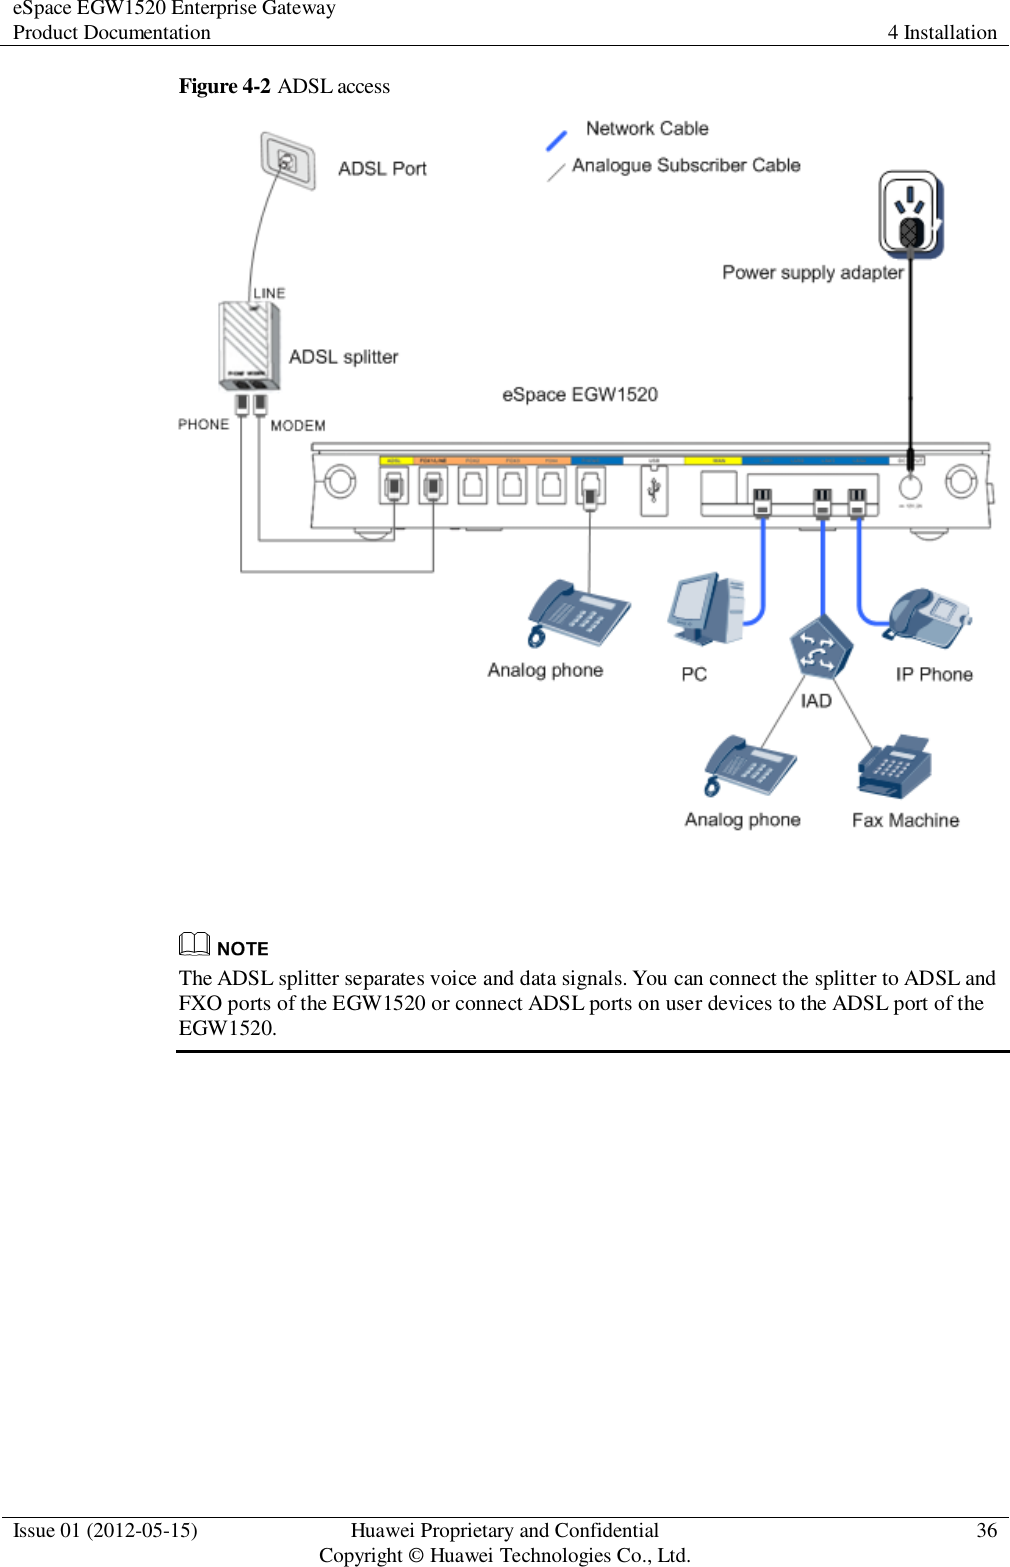 eSpace EGW1520 Enterprise Gateway Product Documentation 4 Installation  Issue 01 (2012-05-15) Huawei Proprietary and Confidential                                     Copyright © Huawei Technologies Co., Ltd. 36  Figure 4-2 ADSL access     The ADSL splitter separates voice and data signals. You can connect the splitter to ADSL and FXO ports of the EGW1520 or connect ADSL ports on user devices to the ADSL port of the EGW1520. 